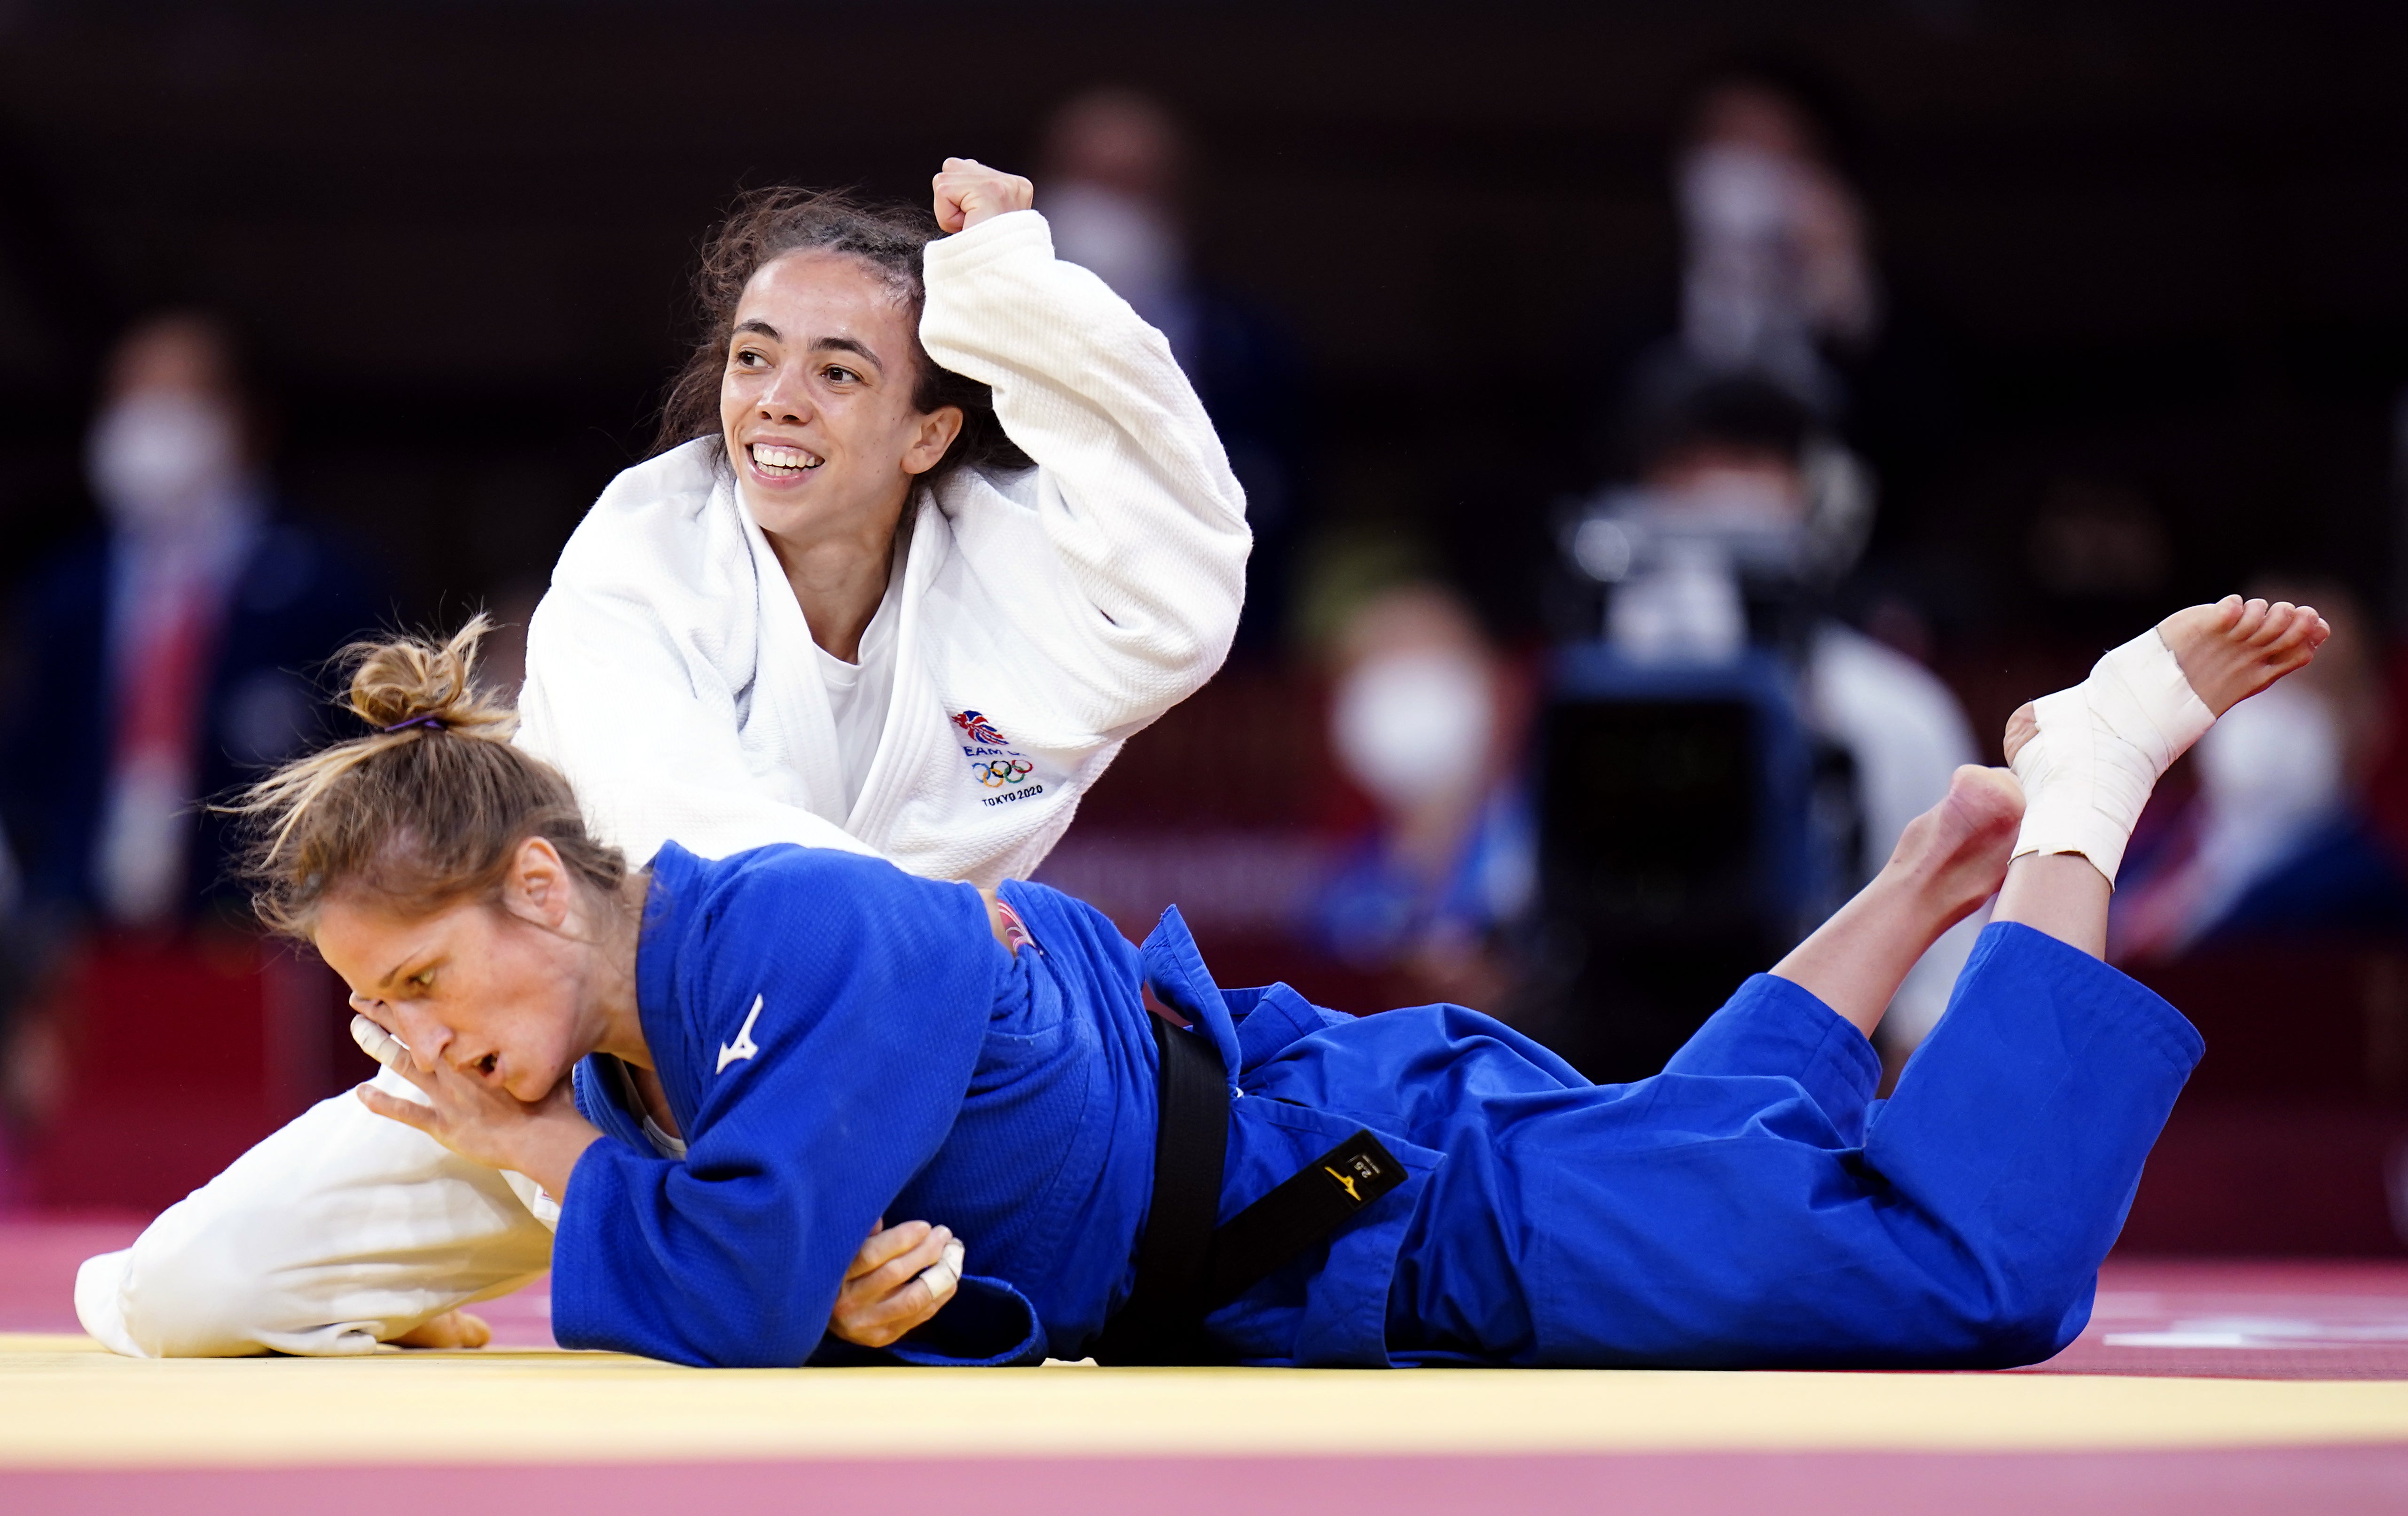 Chelsie Giles won Team GB’s first medal of Tokyo 2020 with bronze in judo (Danny Lawson/PA)